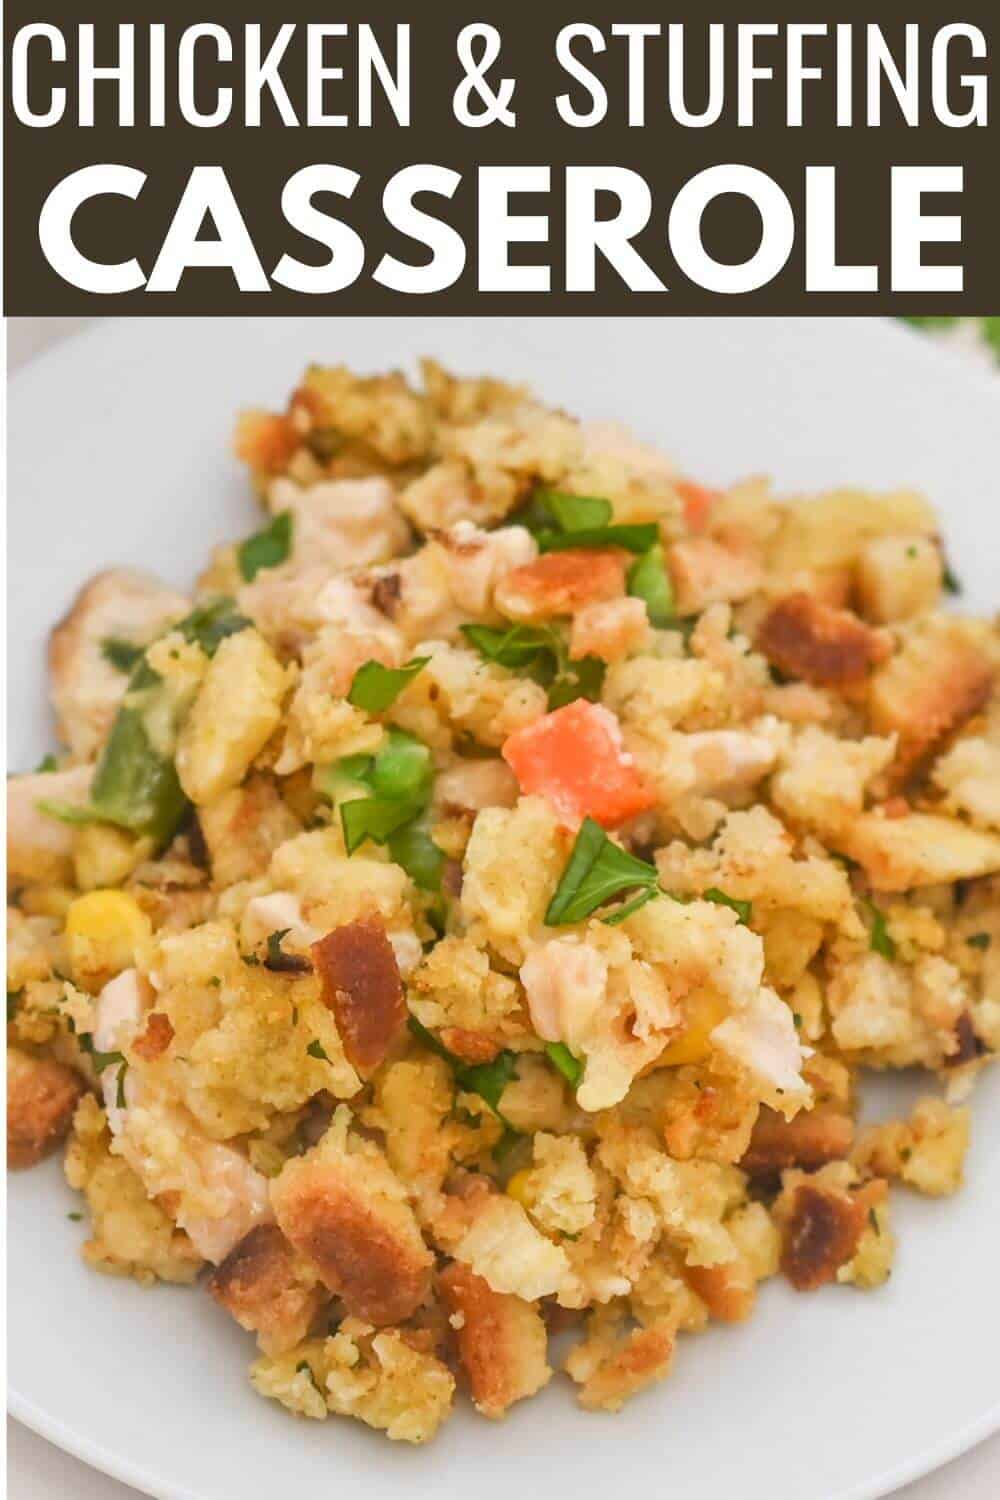 Chicken and stuffing casserole on a plate.